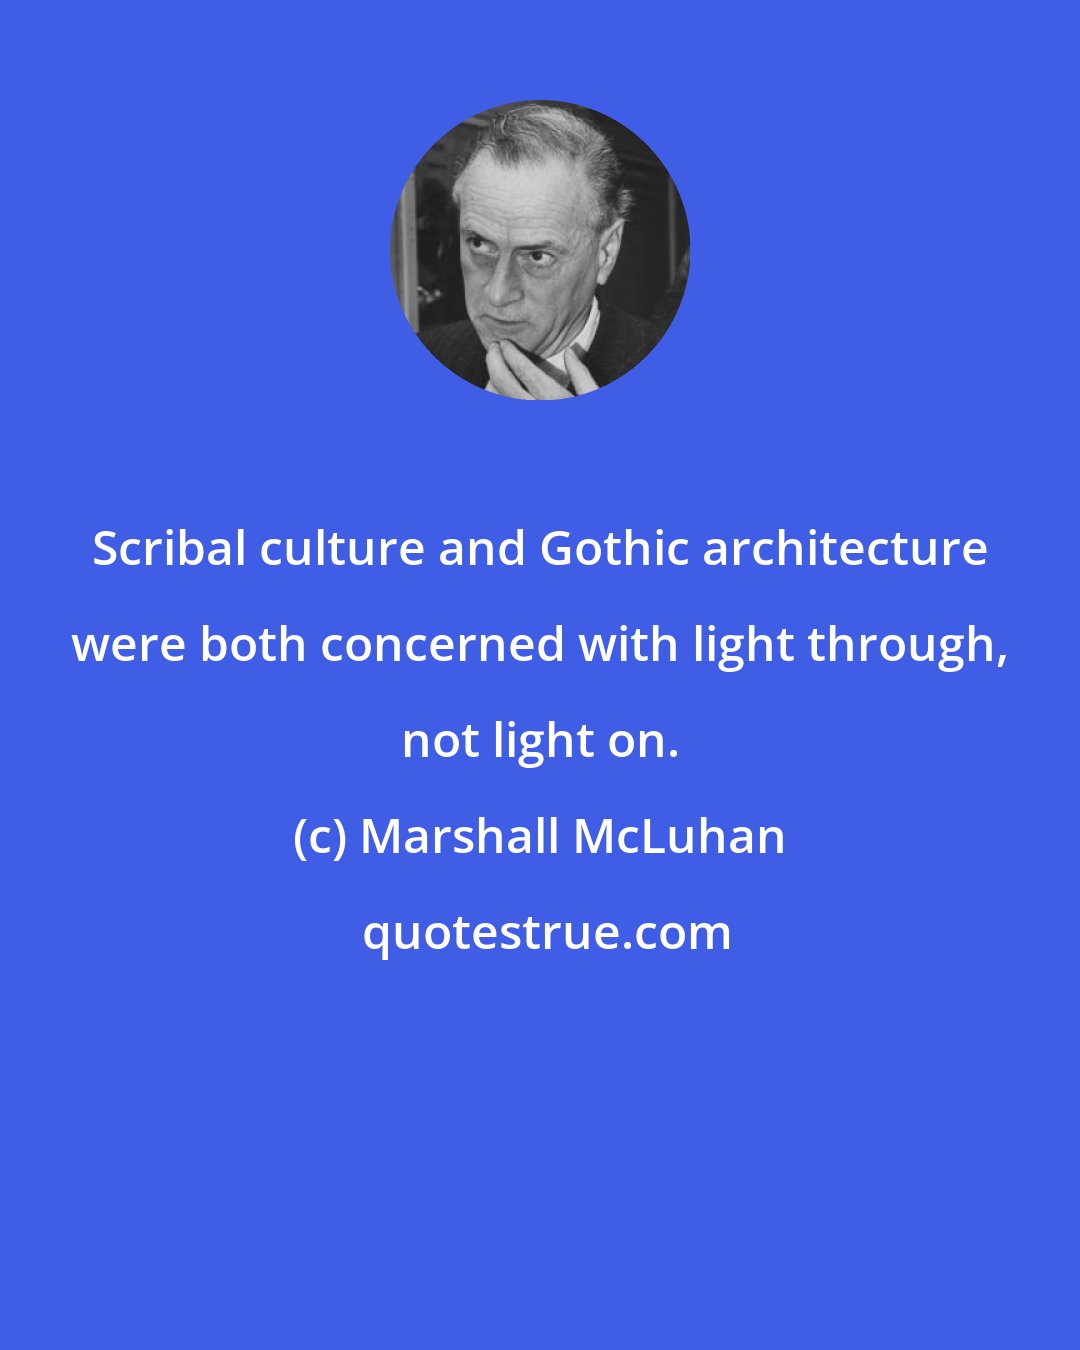 Marshall McLuhan: Scribal culture and Gothic architecture were both concerned with light through, not light on.